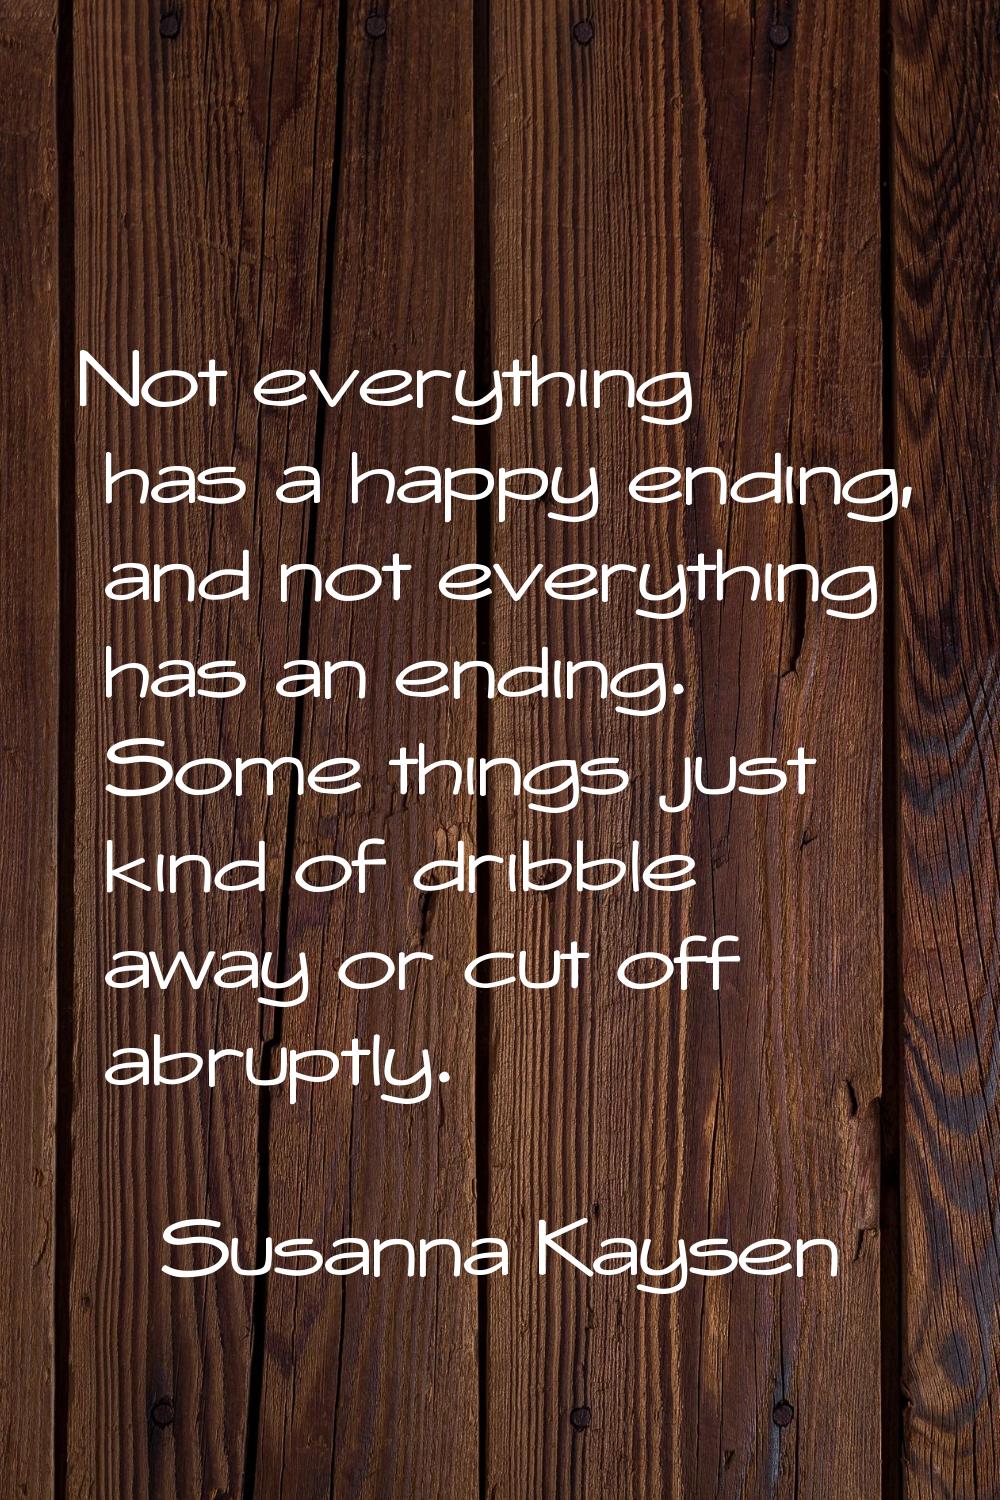 Not everything has a happy ending, and not everything has an ending. Some things just kind of dribb